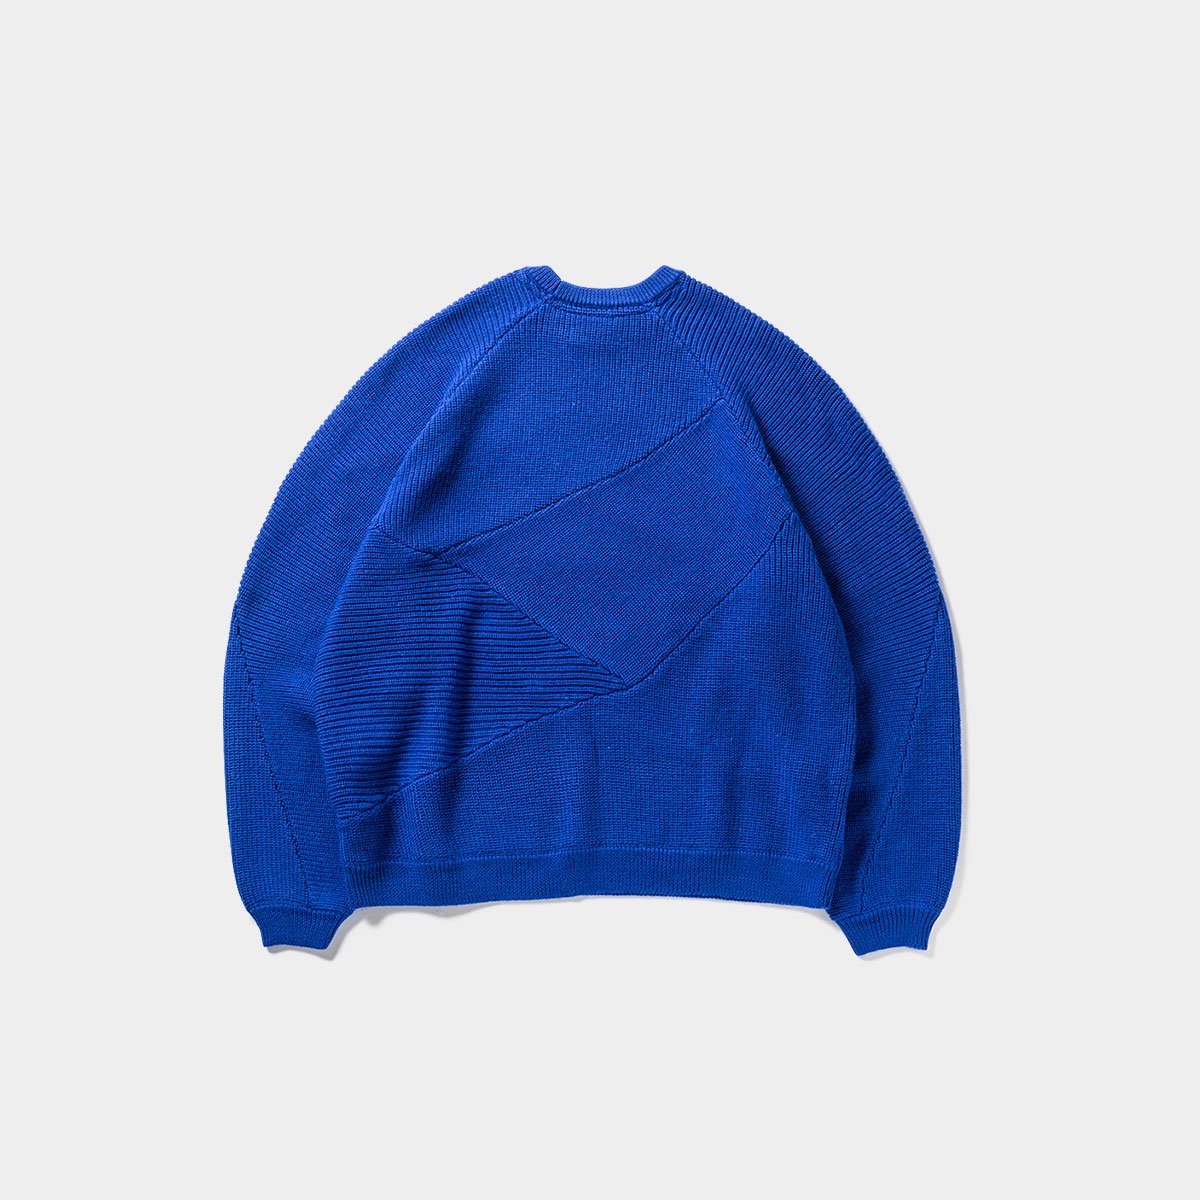 TIGHTBOOTH - SPLICE KNIT SWEATER - SHRED